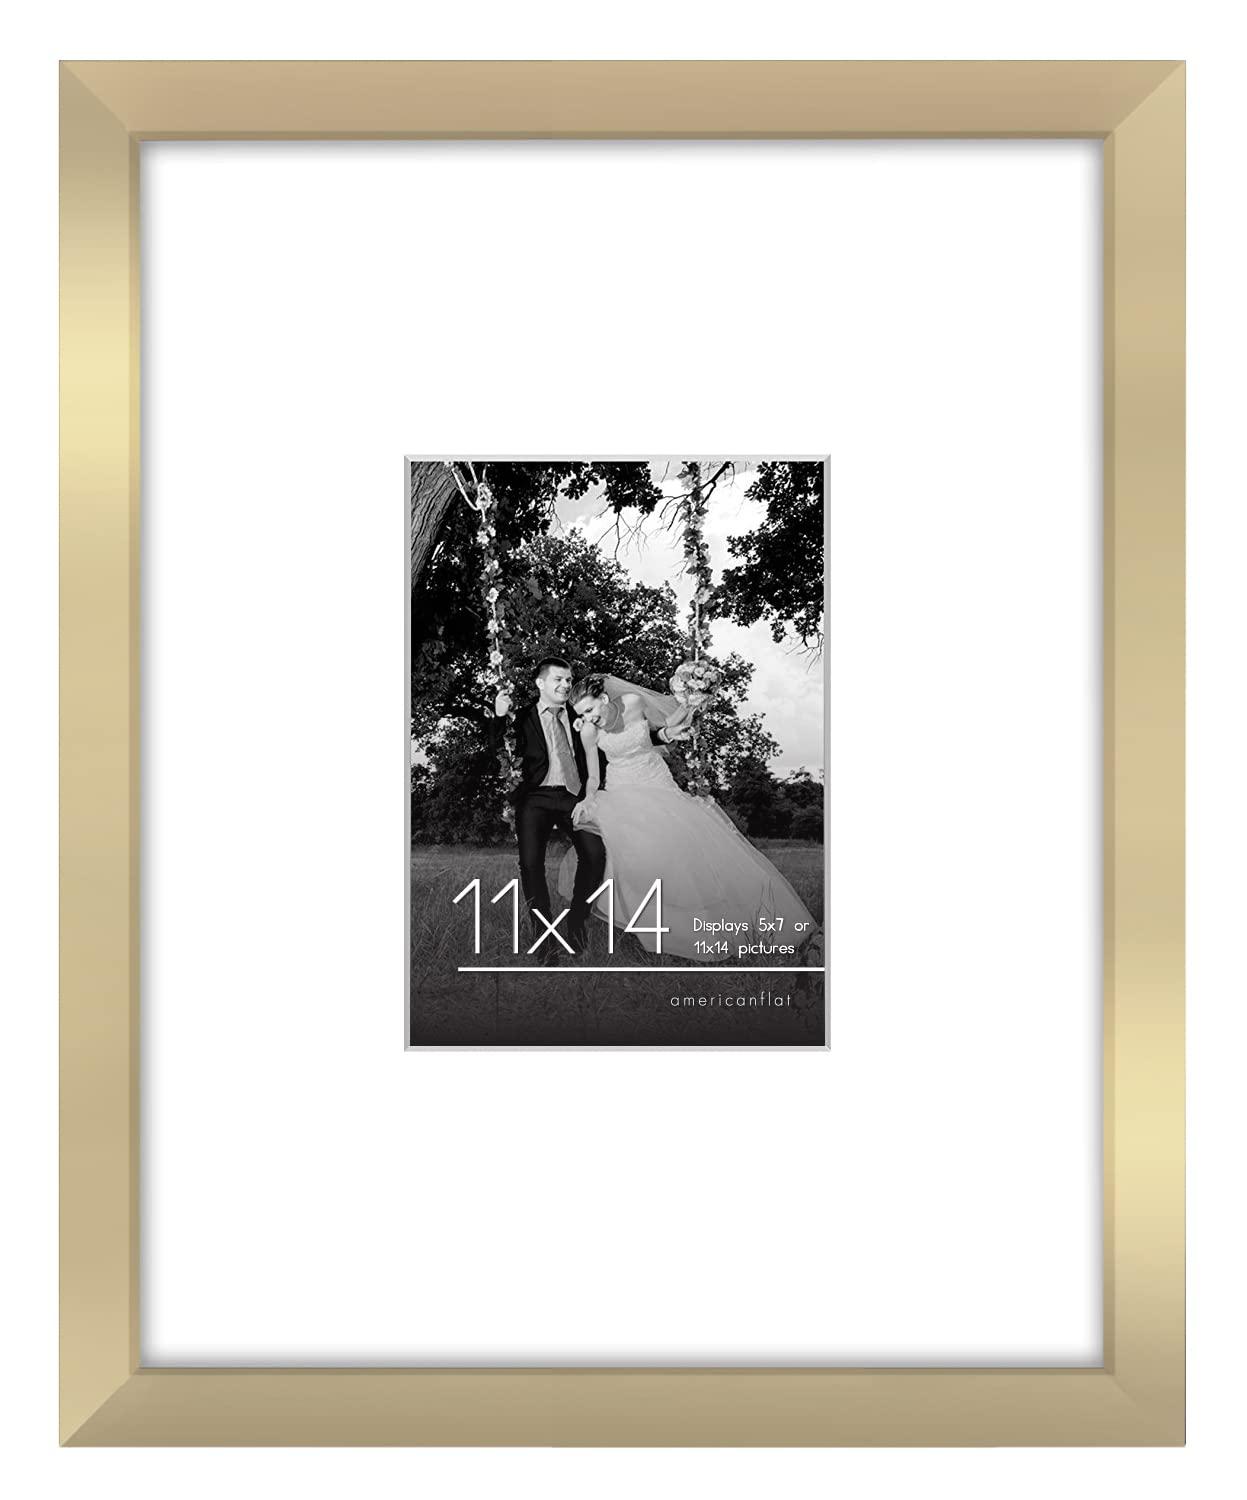 Americanflat americanflat 11x14 picture frame in gold - use as 5x7 frame  with mat or 11x14 frame without mat - engineered wood with shatte